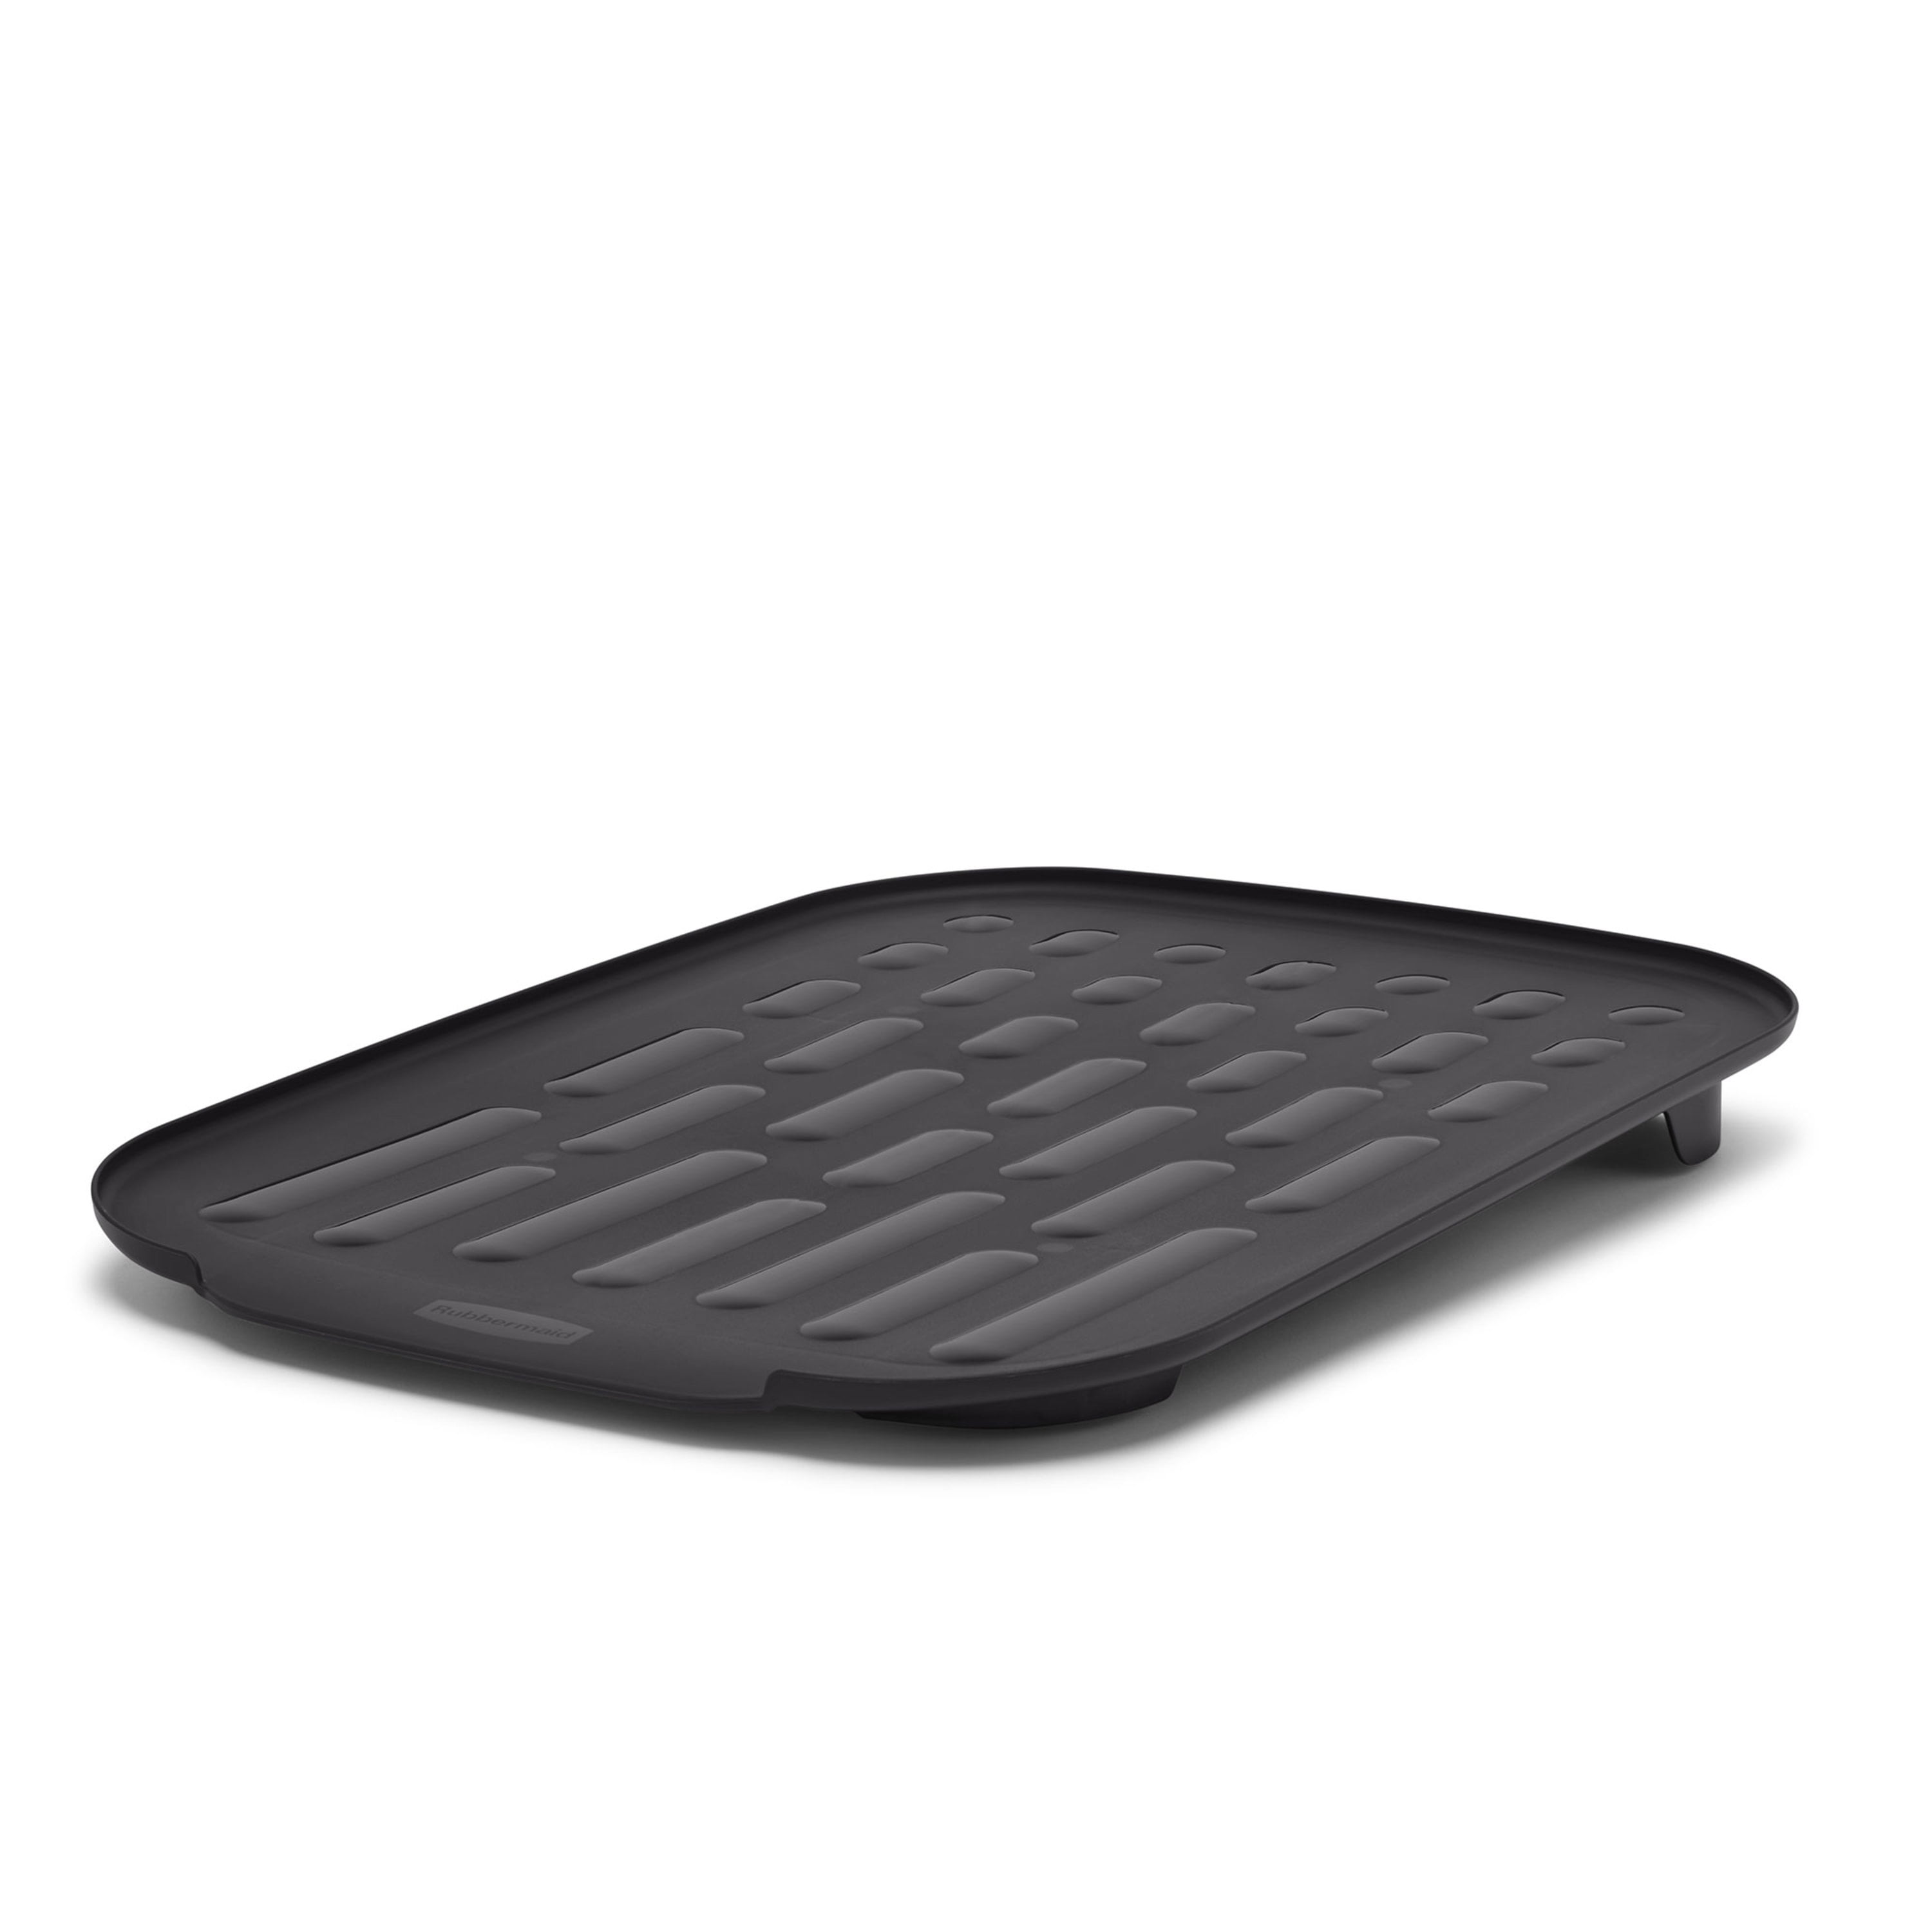 Rubbermaid Antimicrobial Dish Drain Board, Oyster